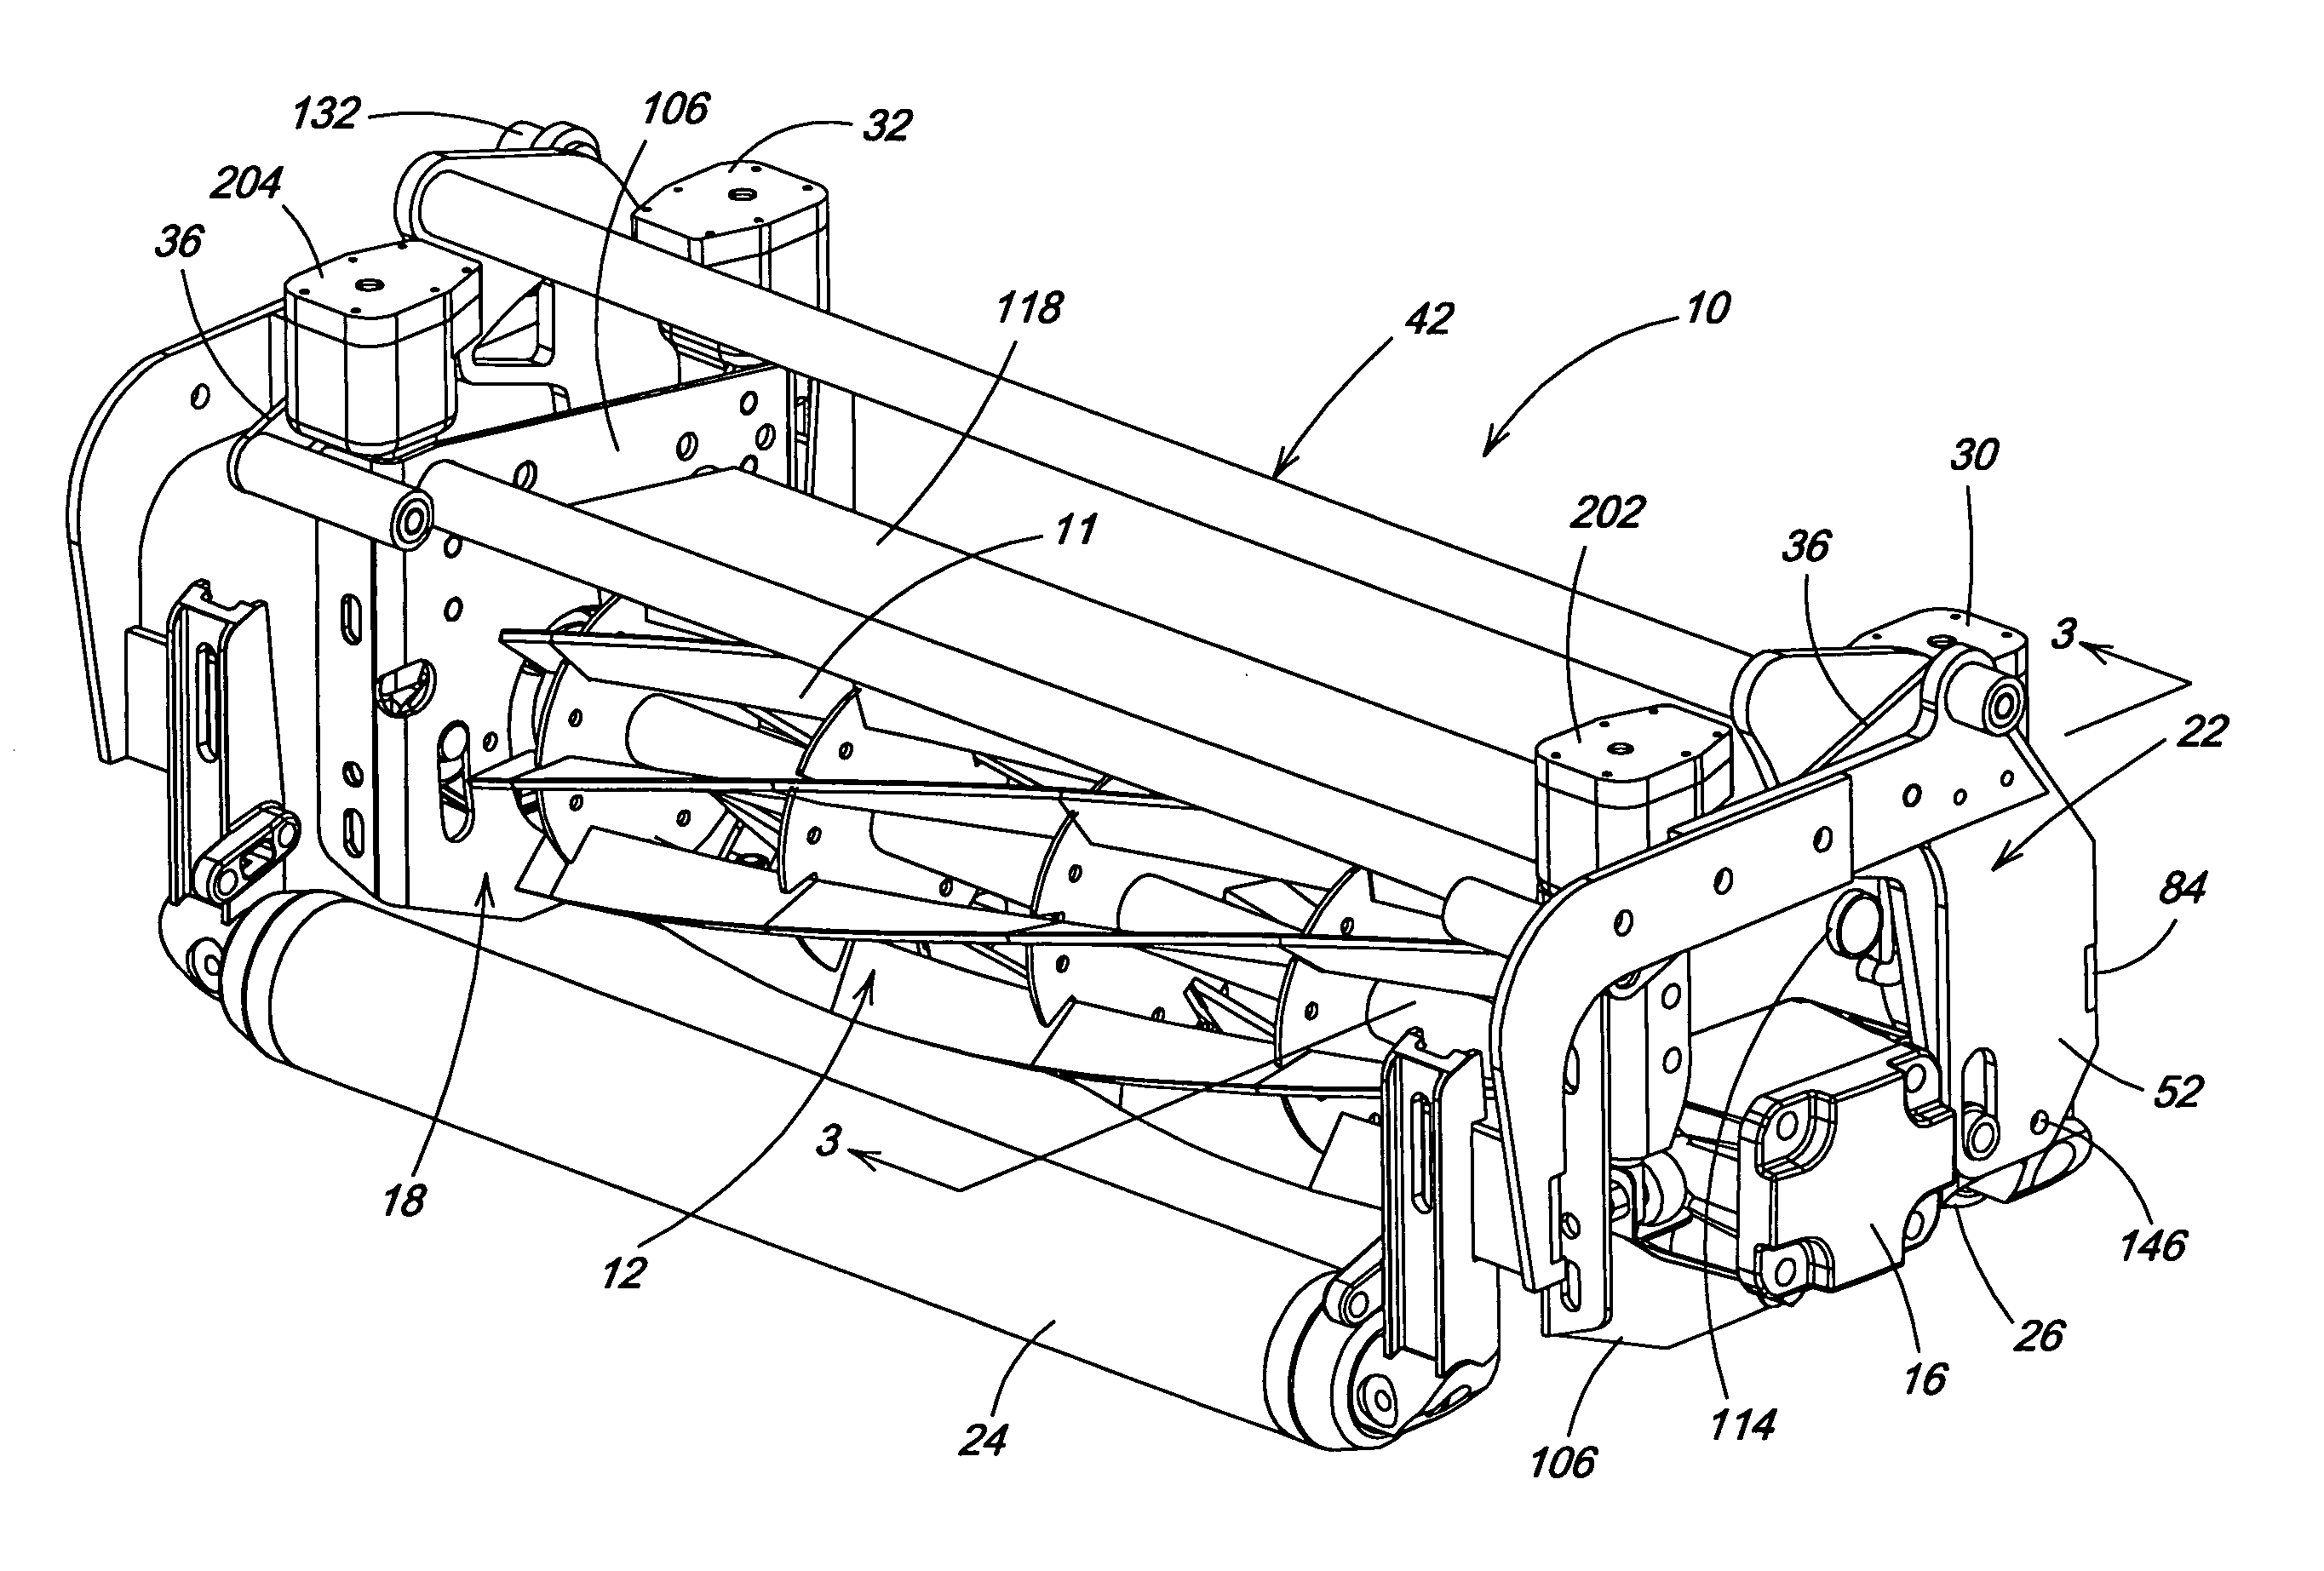 Height-of-cut adjustment system for reel mower